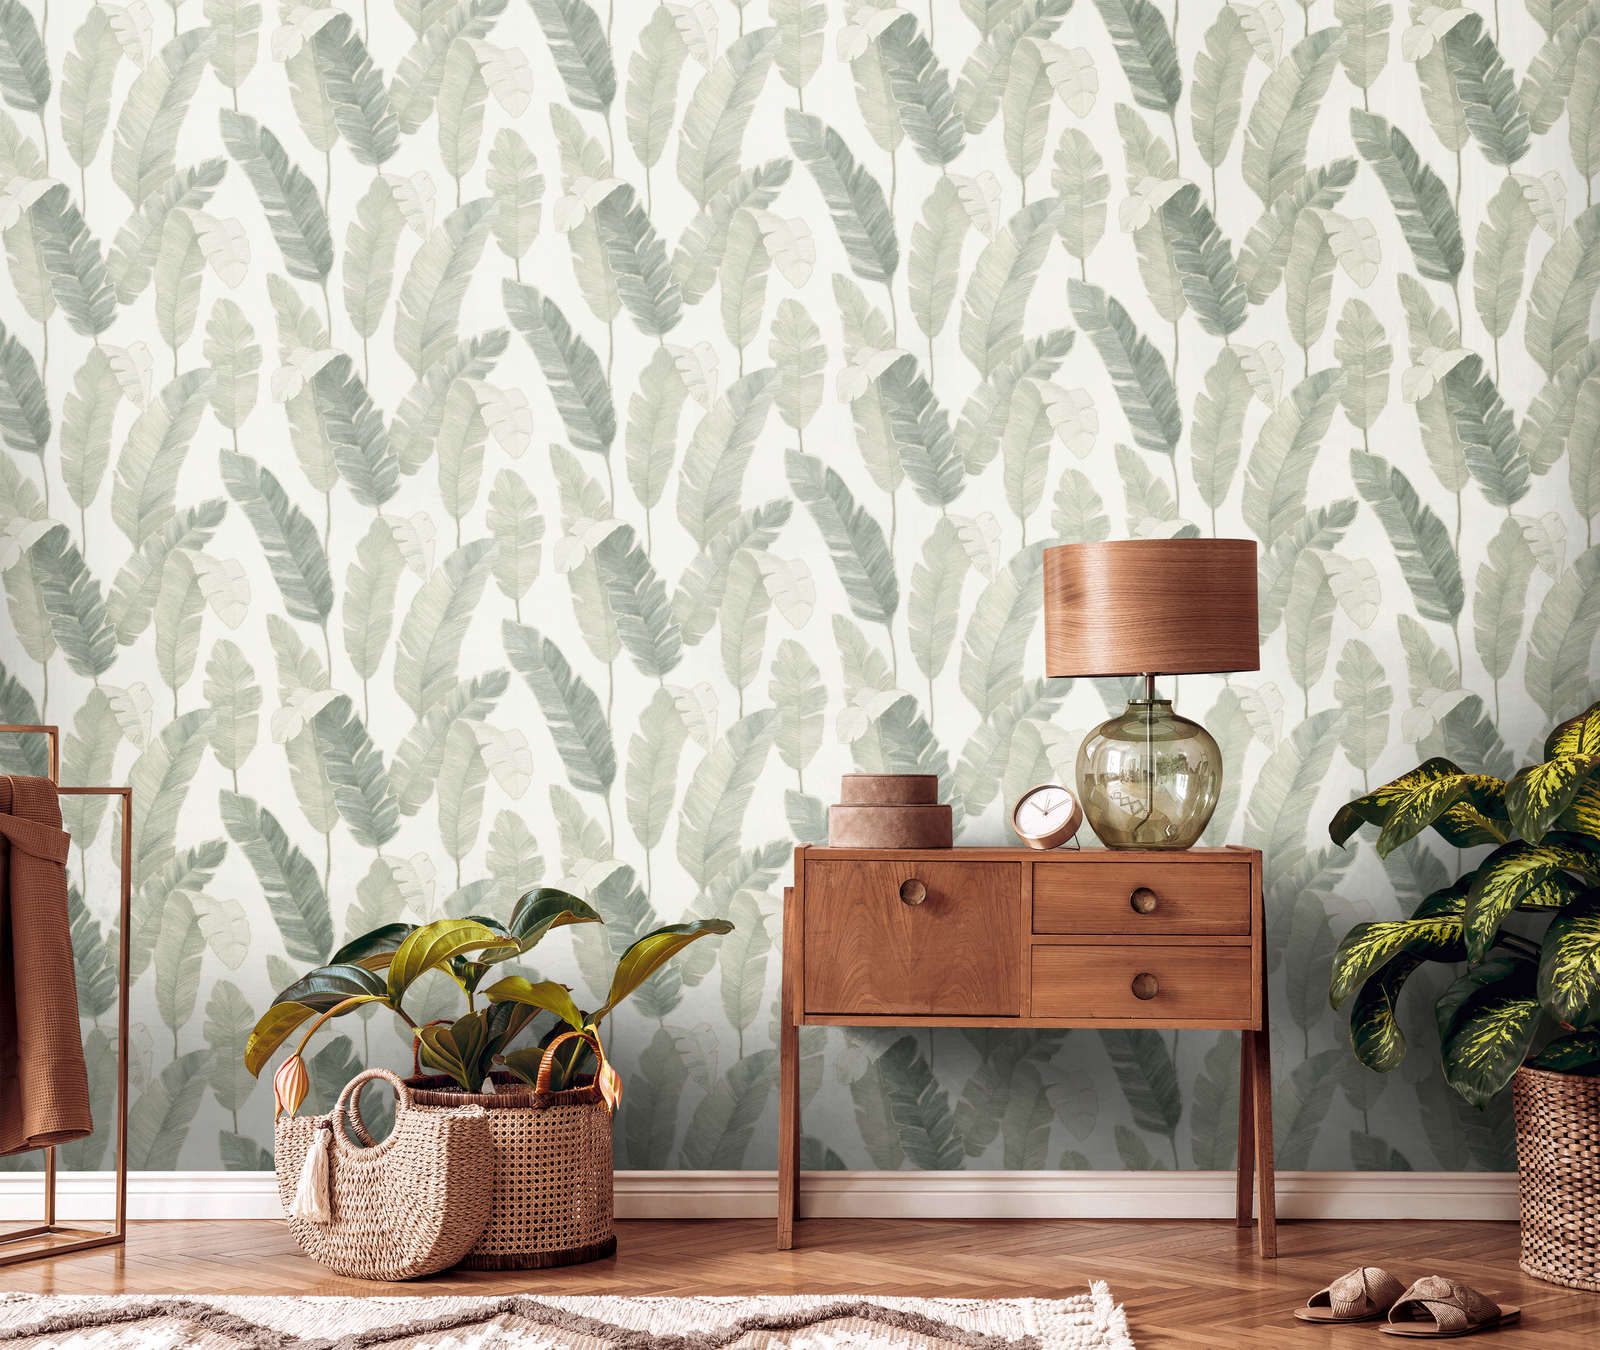             Non-woven wallpaper with palm leaves in light colour - white, green, blue
        